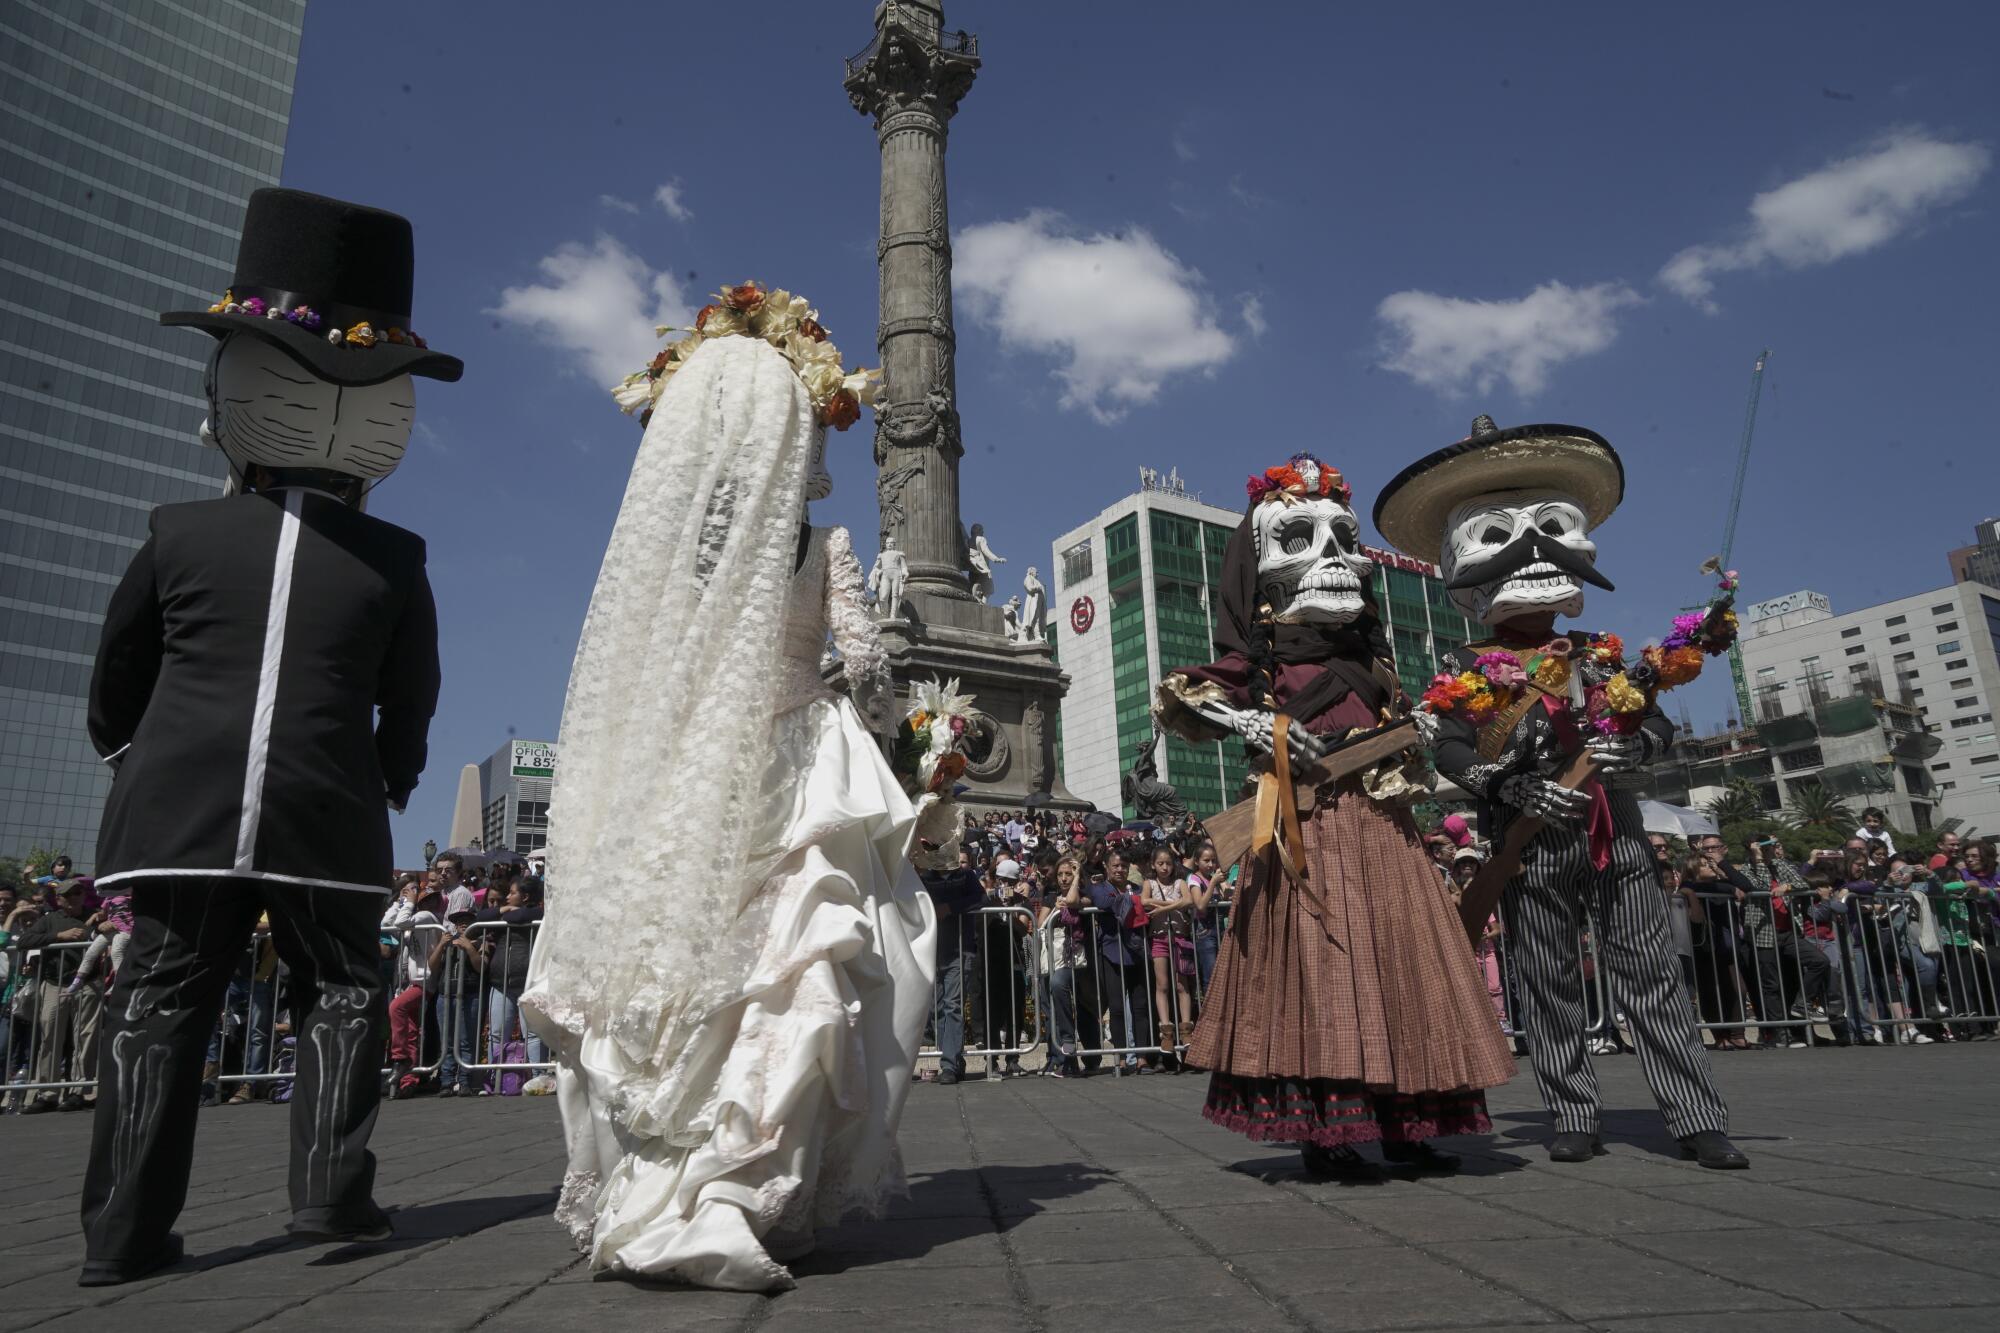 Two couples dressed in skeletal costumes dance in the street